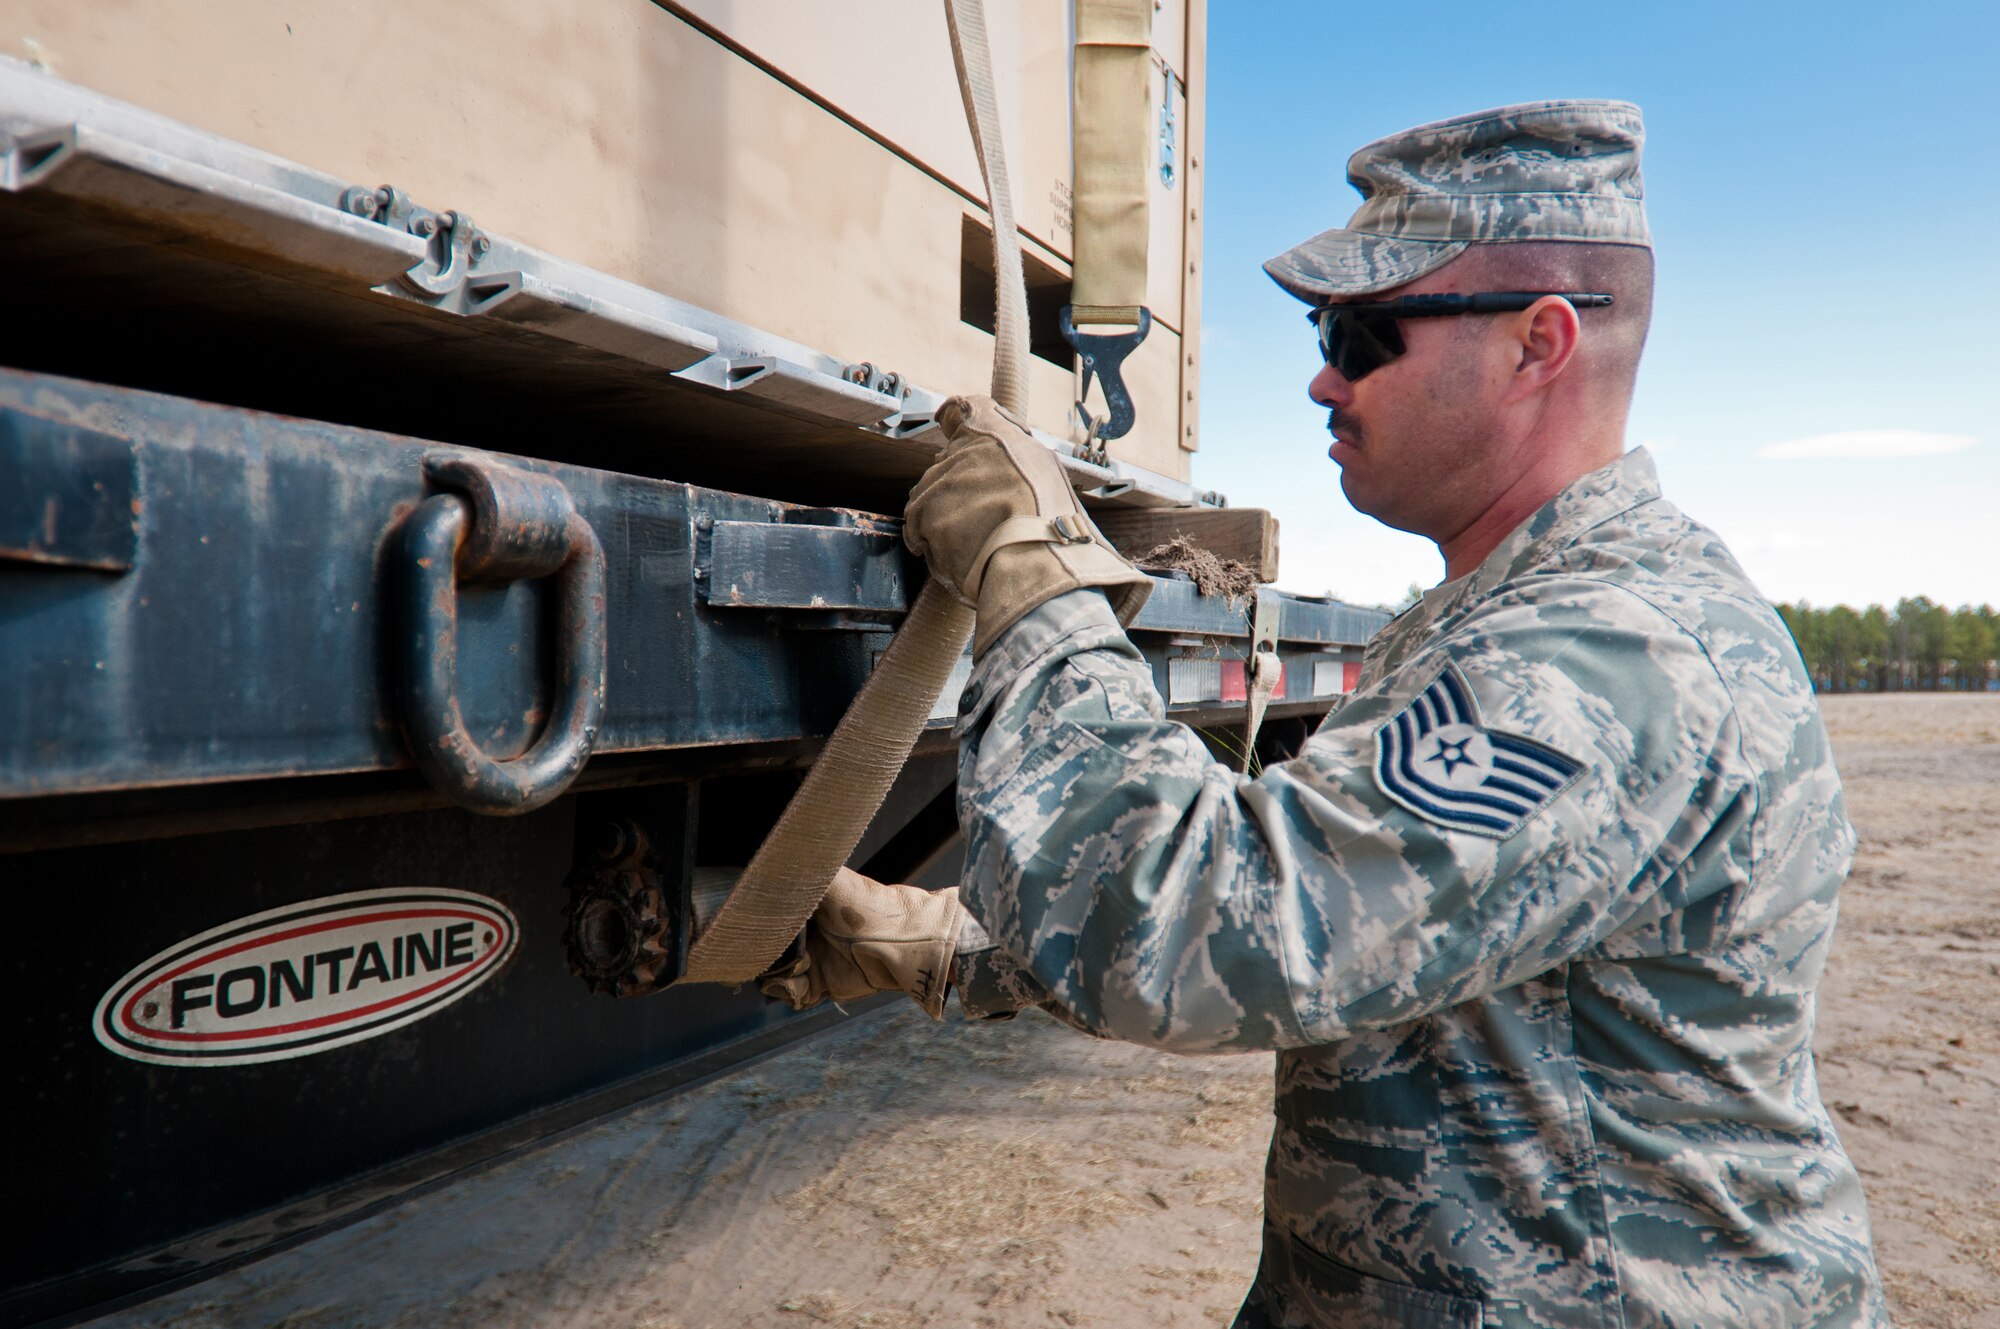 Tech. Sgt. Jeremy Hitt, a vehicle operator from the 22nd Logistics Readiness Squadron at McConnell Air Force Base, Kan., straps cargo to a flatbed trailer March 29, 2012, at Joint Base McGuire-Dix-Lakehurst, N.J. Hitt was working at the Forward Node of a Joint Task Force-Port Opening during Eagle Flag, a U.S. Air Force-sponsored exercise to prepare units for operating in deployed environments. The Kentucky Air National Guard's 123rd Contingency Response Group operated the airlift side of the JTF-PO, known as an Aerial Port of Debarkation. (U.S. Air Force photo by Maj. Dale Greer)